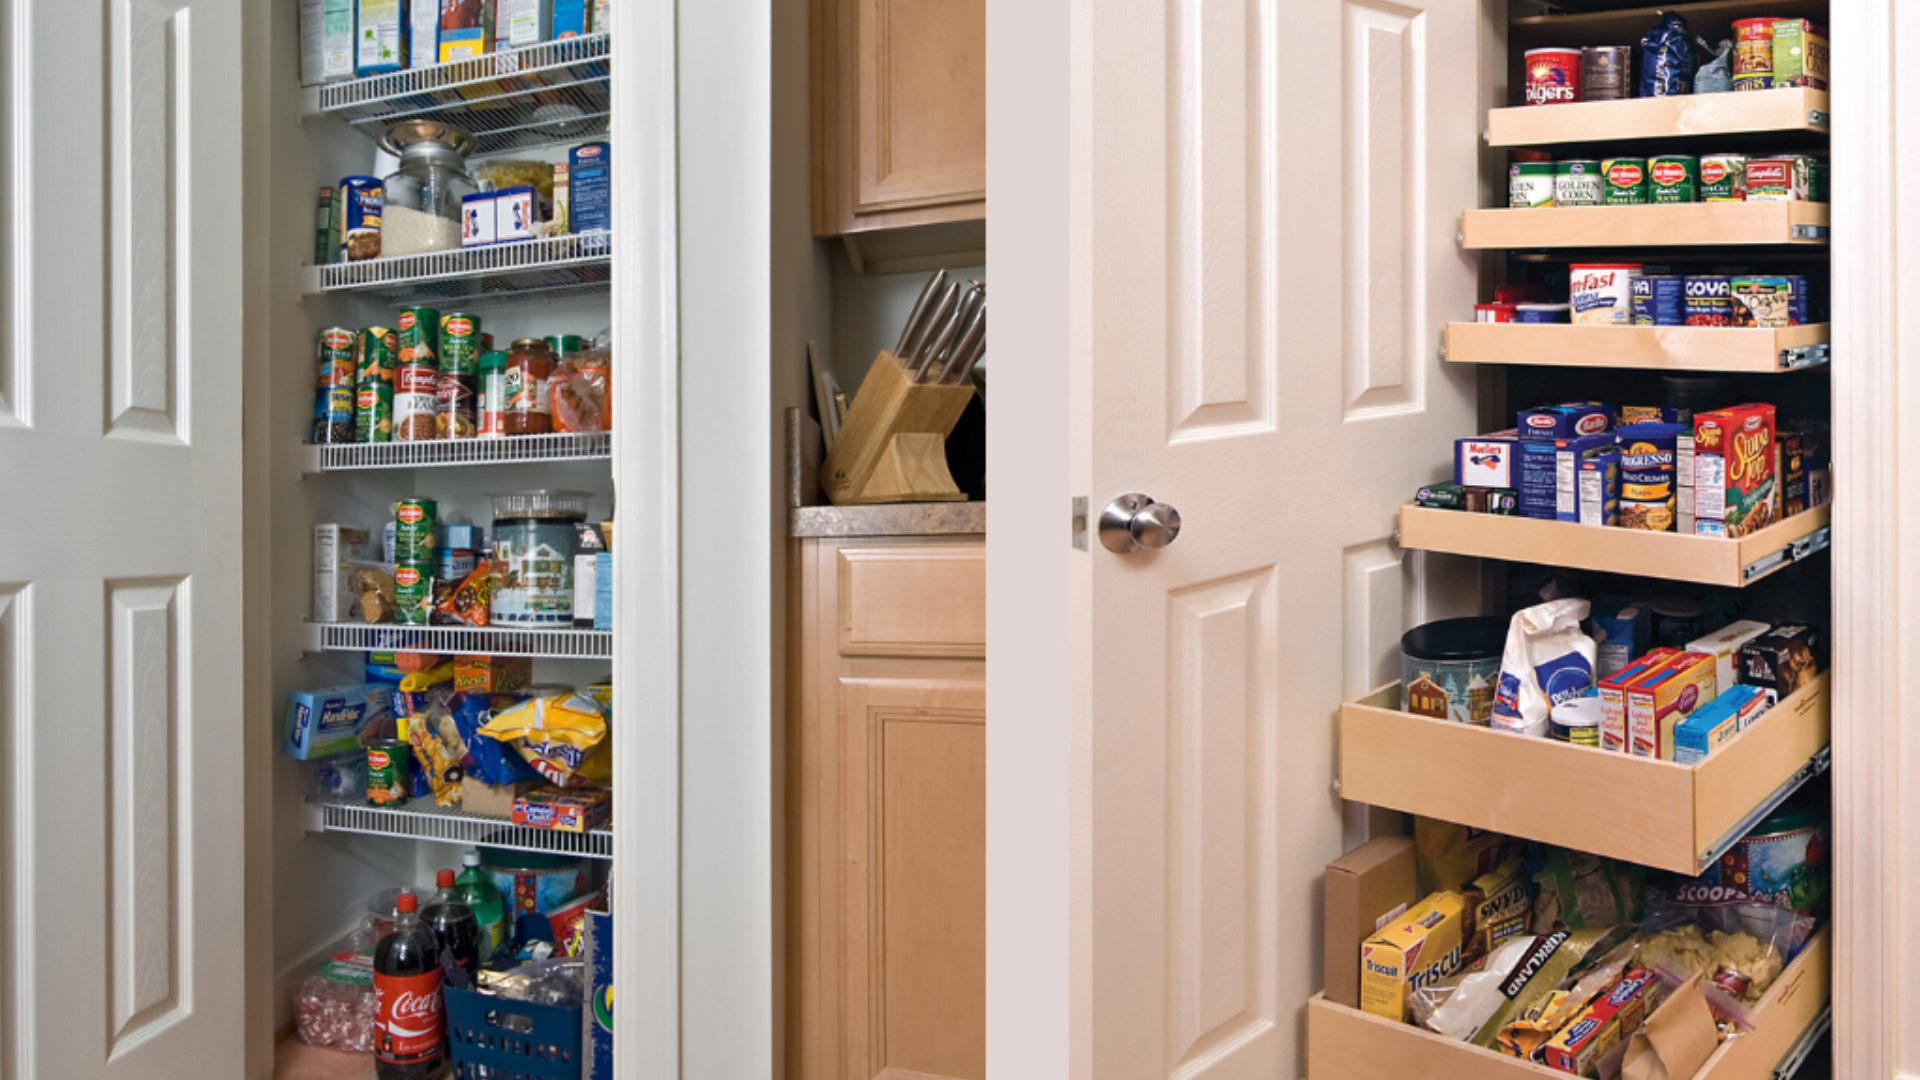 Turn inefficient kitchen storage areas into organized spaces with Glide-Out shelves. Sponsored by ShelfGenie.